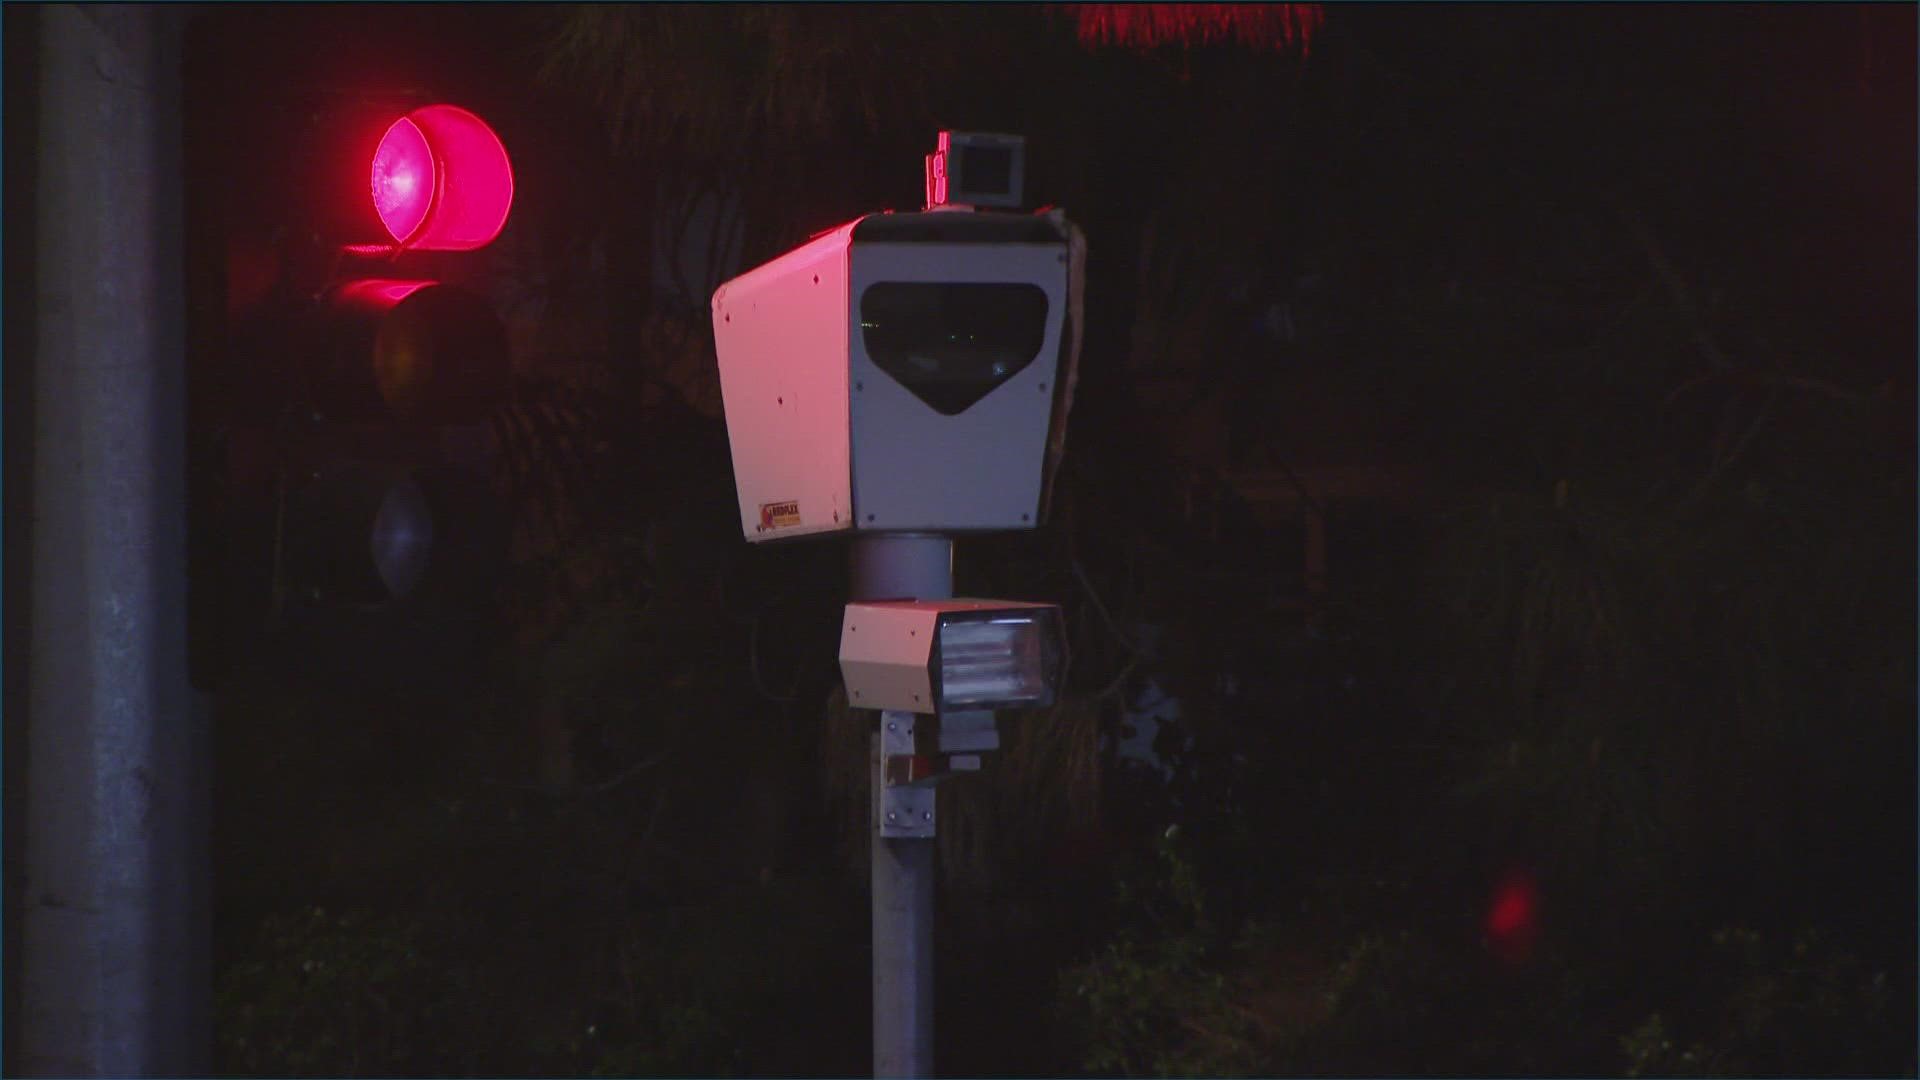 Five cameras will soon keep watch at Del Mar's busiest intersections.